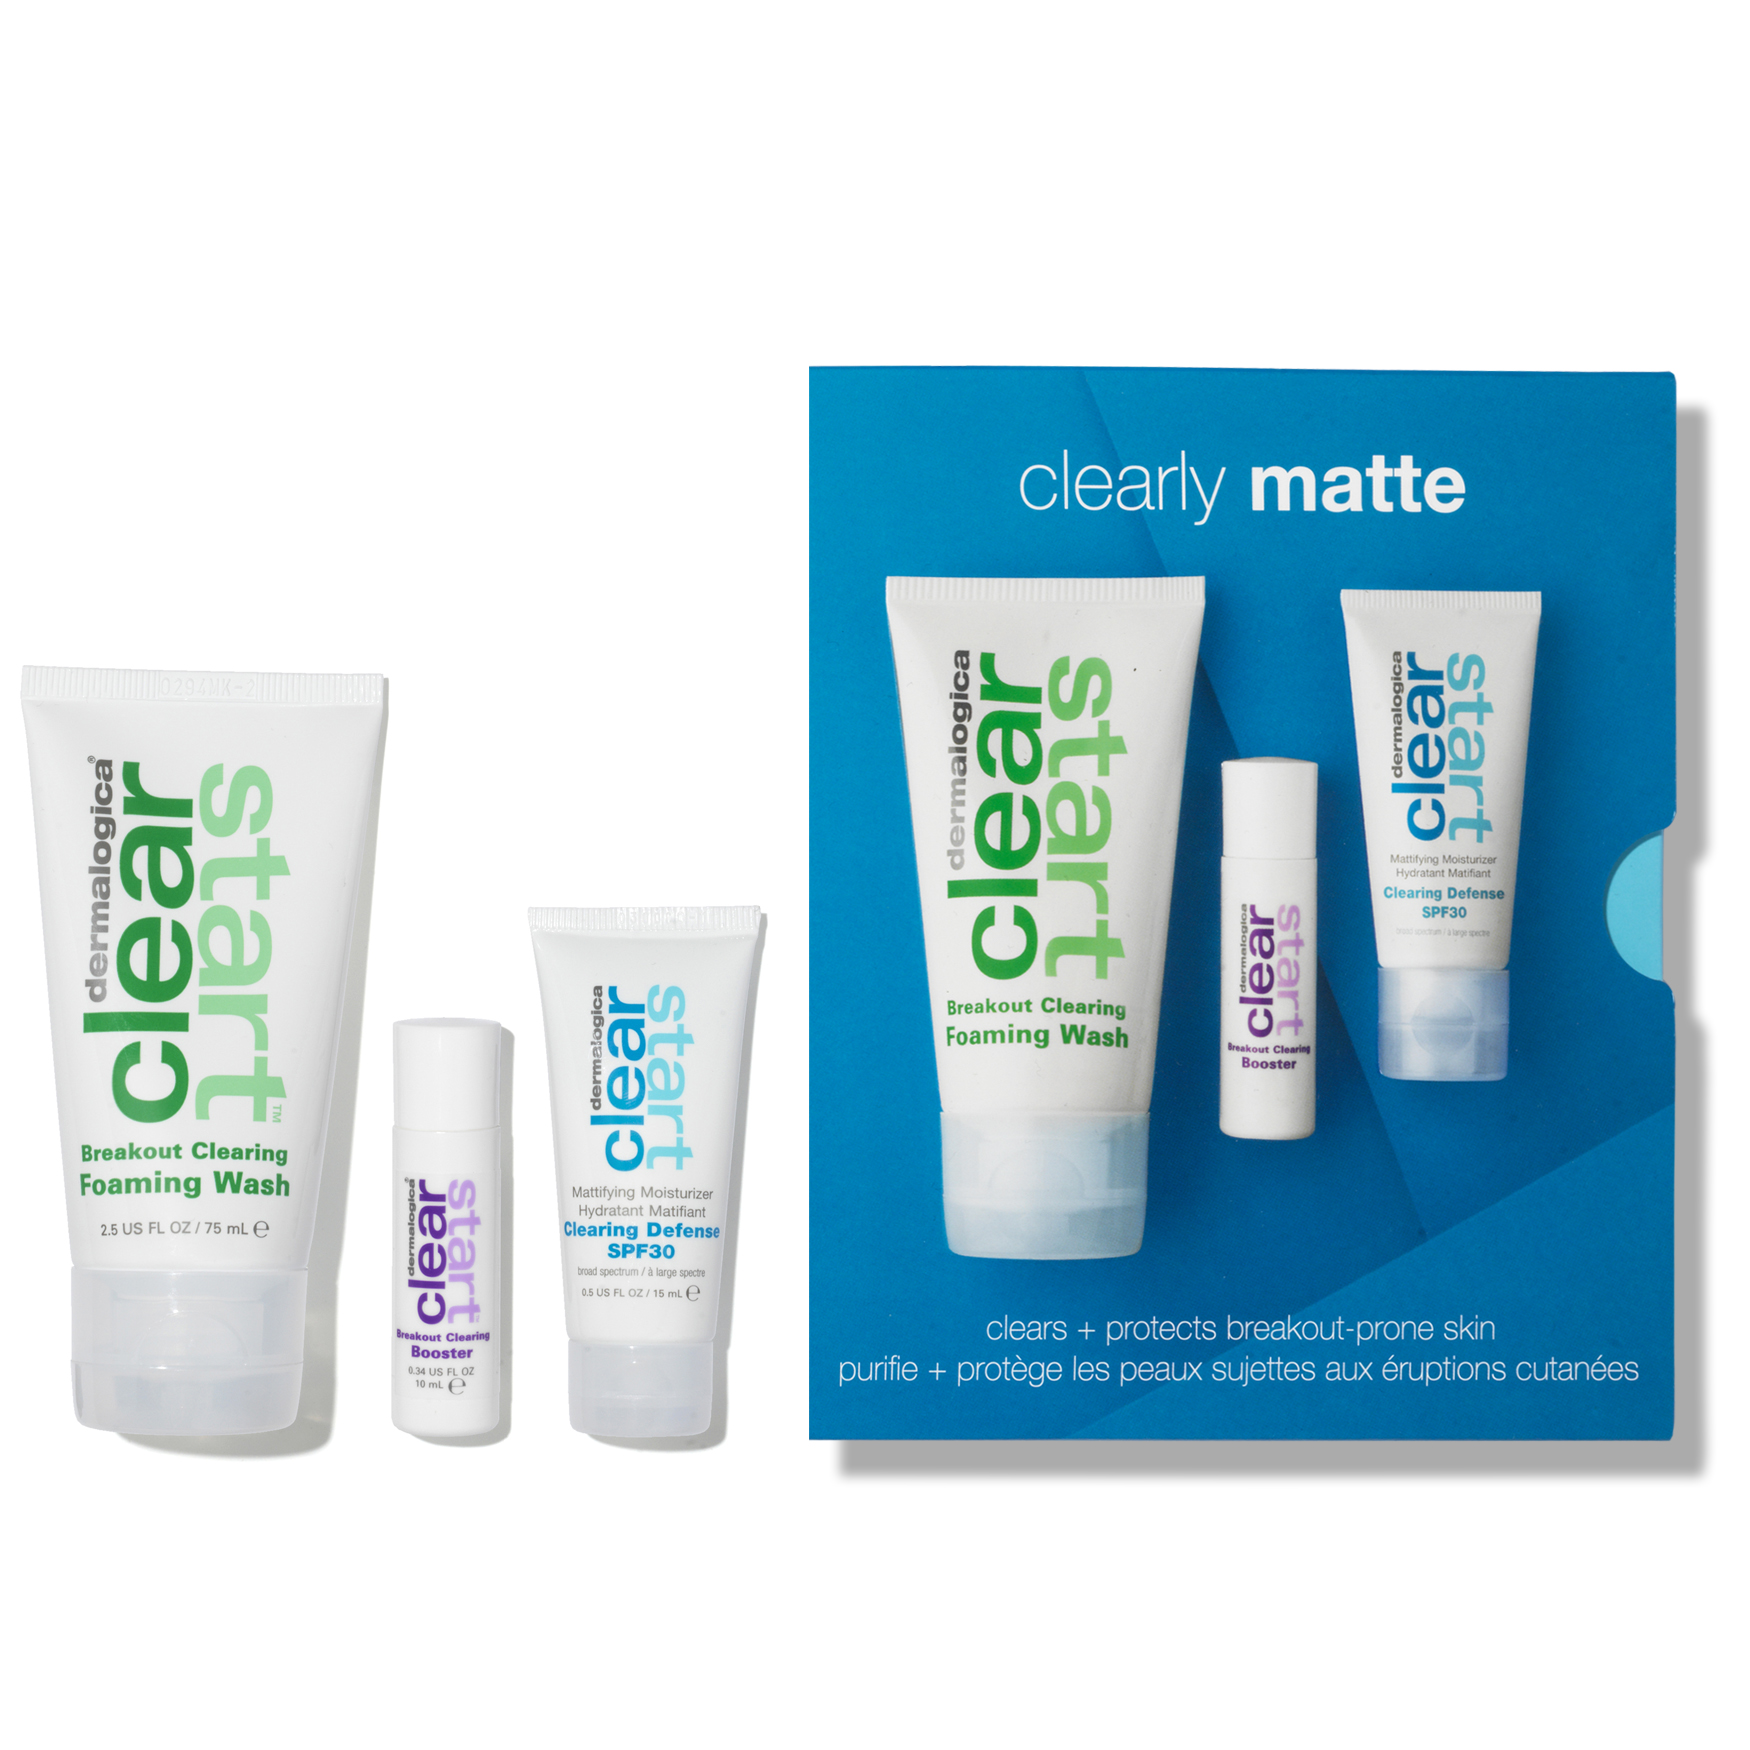 Dermalogica Kit Clearly Matte | Space NK